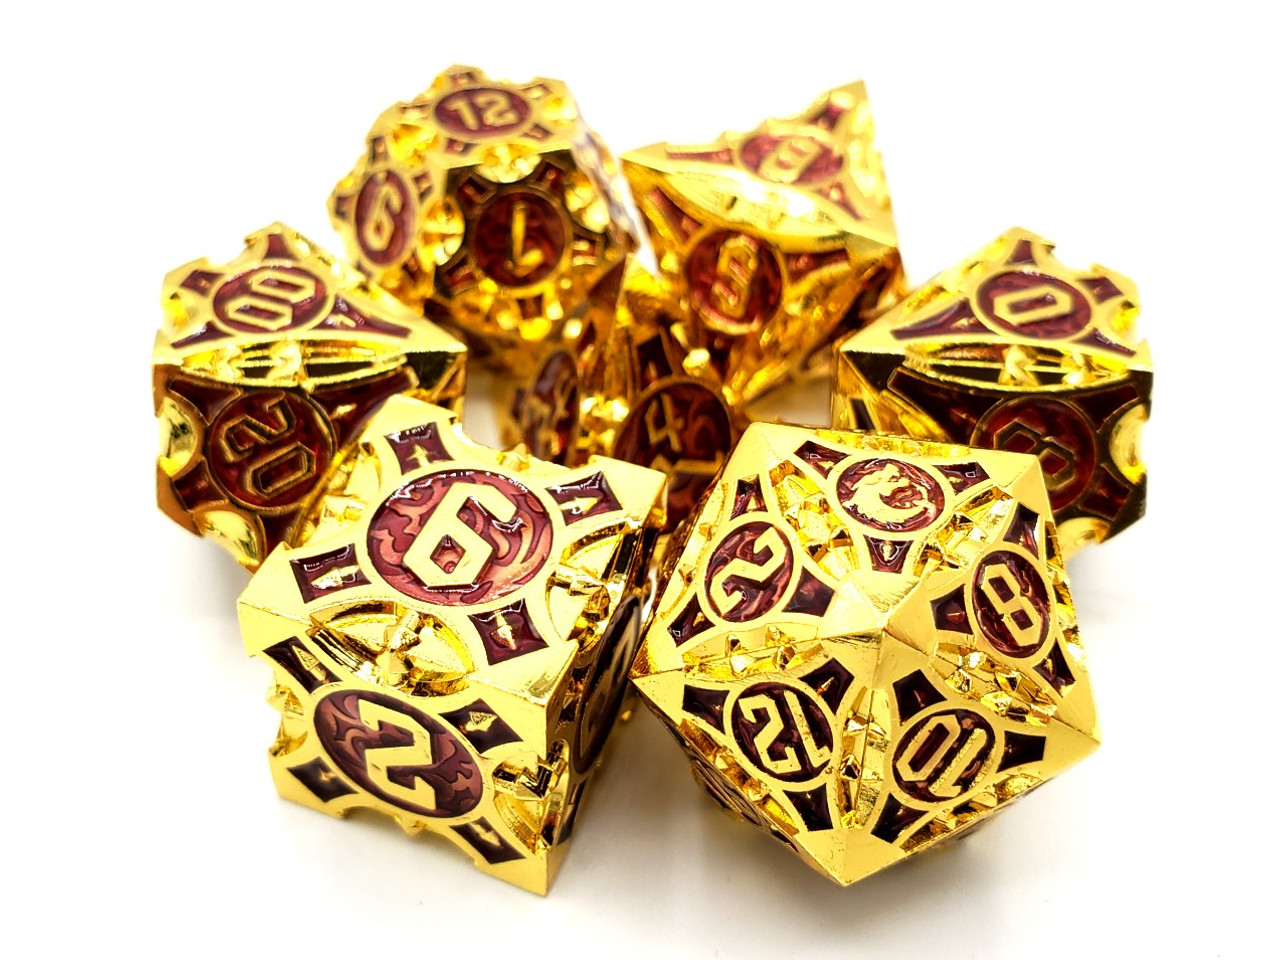 Old School 7 Piece Dnd RPG Metal Dice Set Gnome Forged - Gold W/ Purple